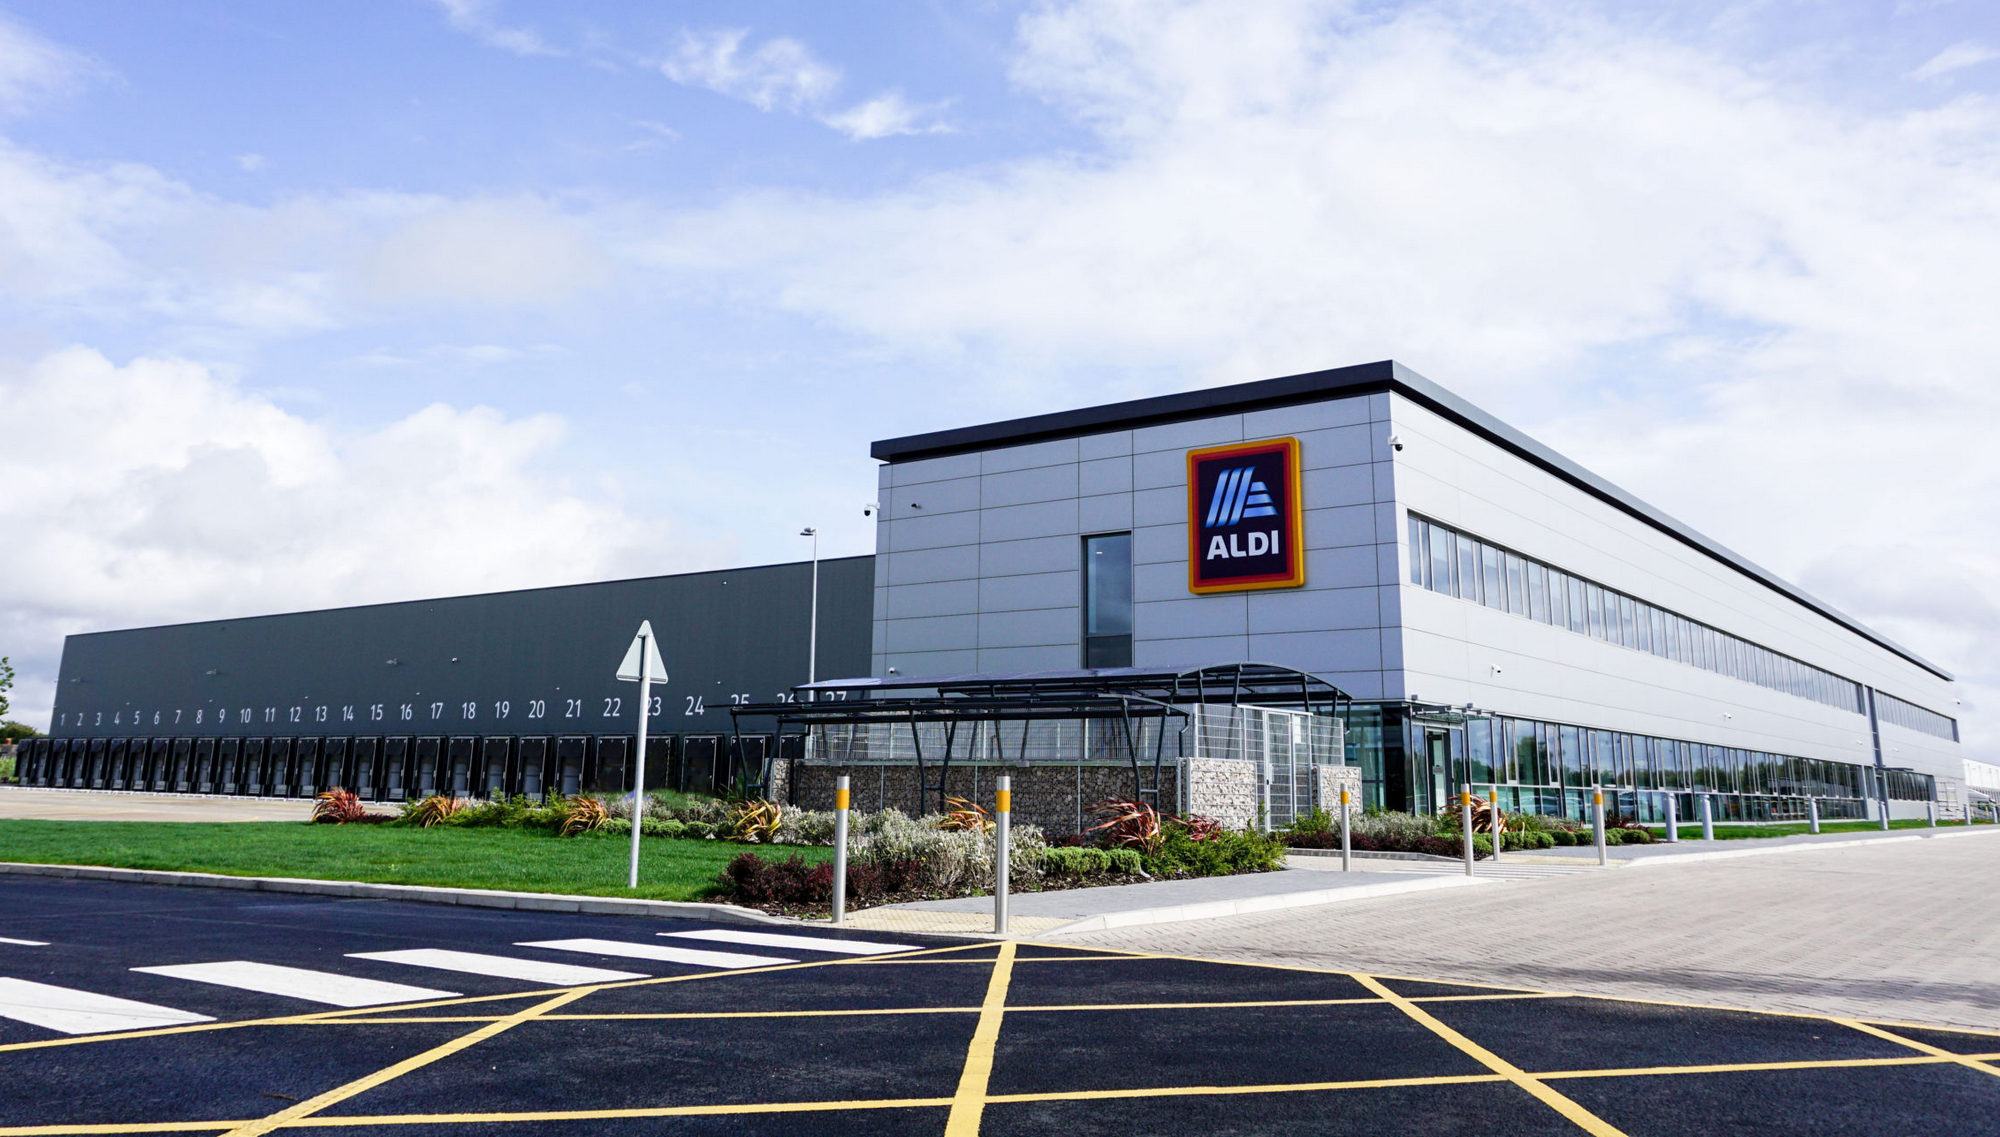 Aldi overtakes Morrisons to become 4th largest supermarket